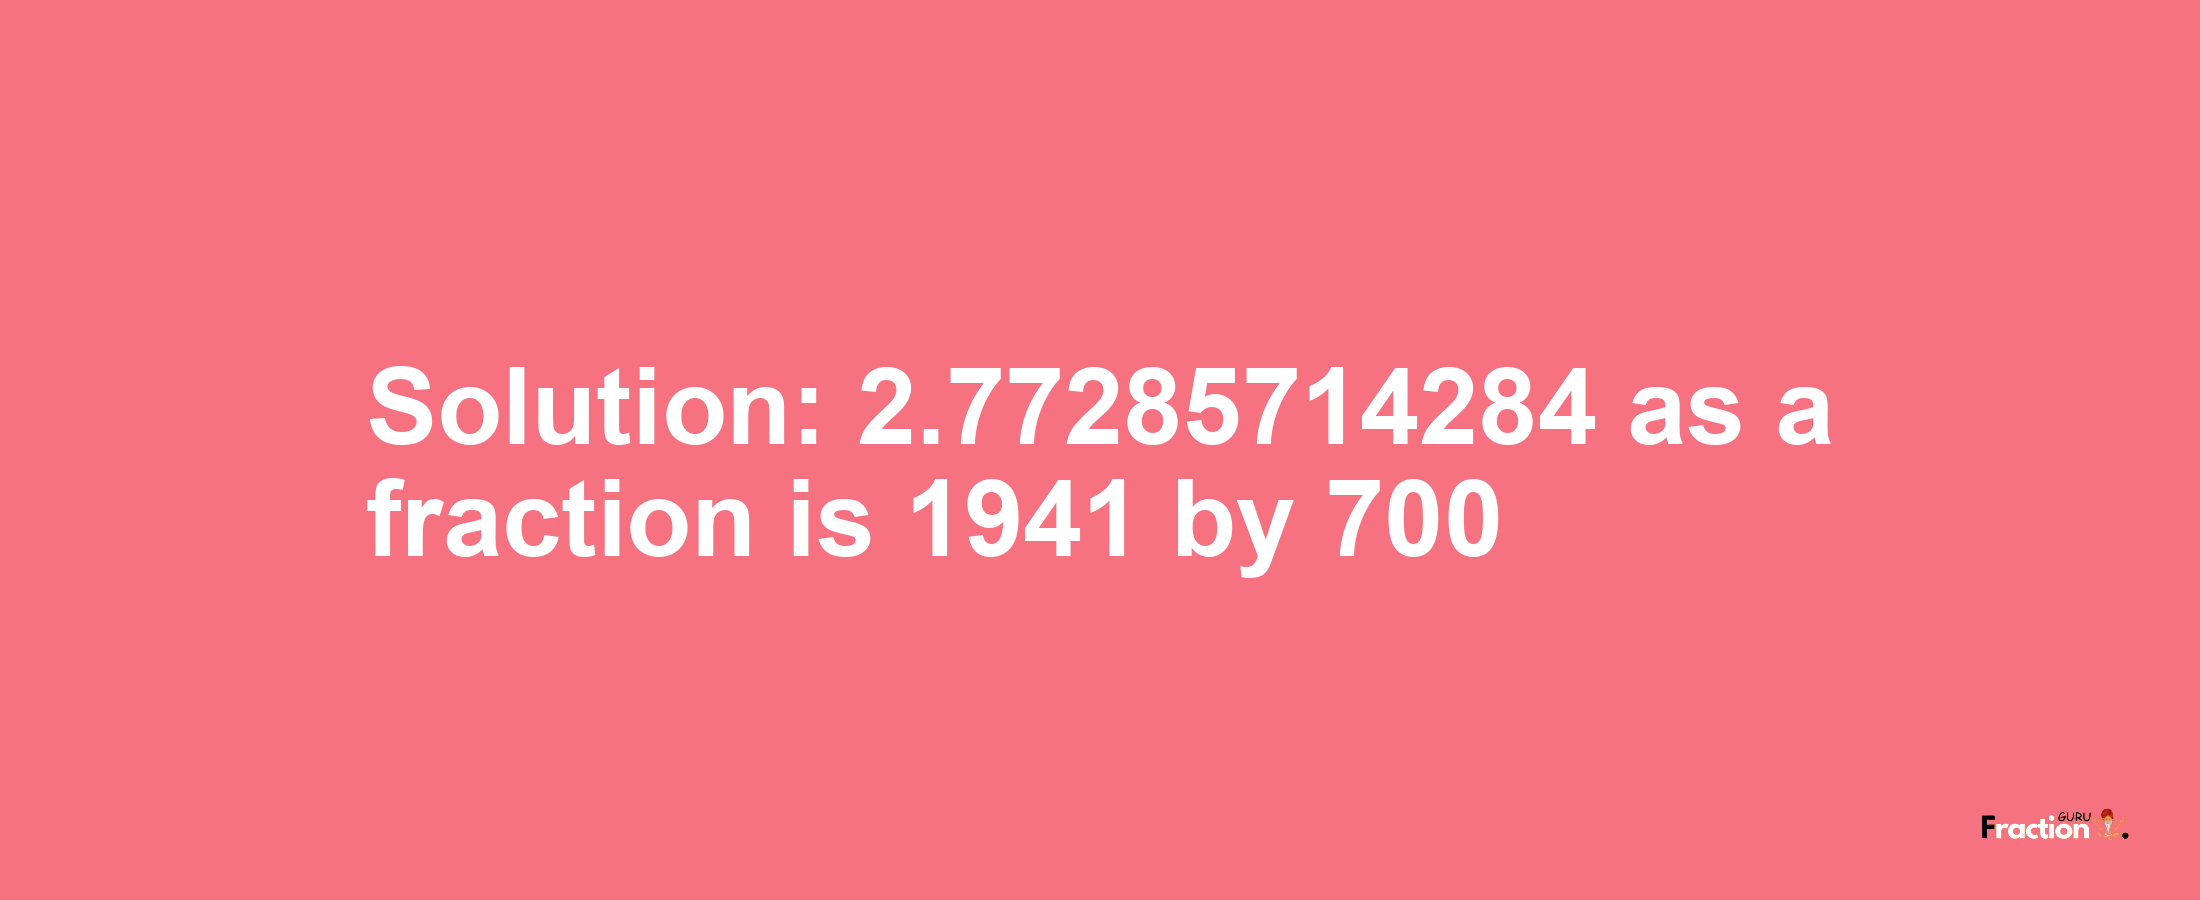 Solution:2.77285714284 as a fraction is 1941/700